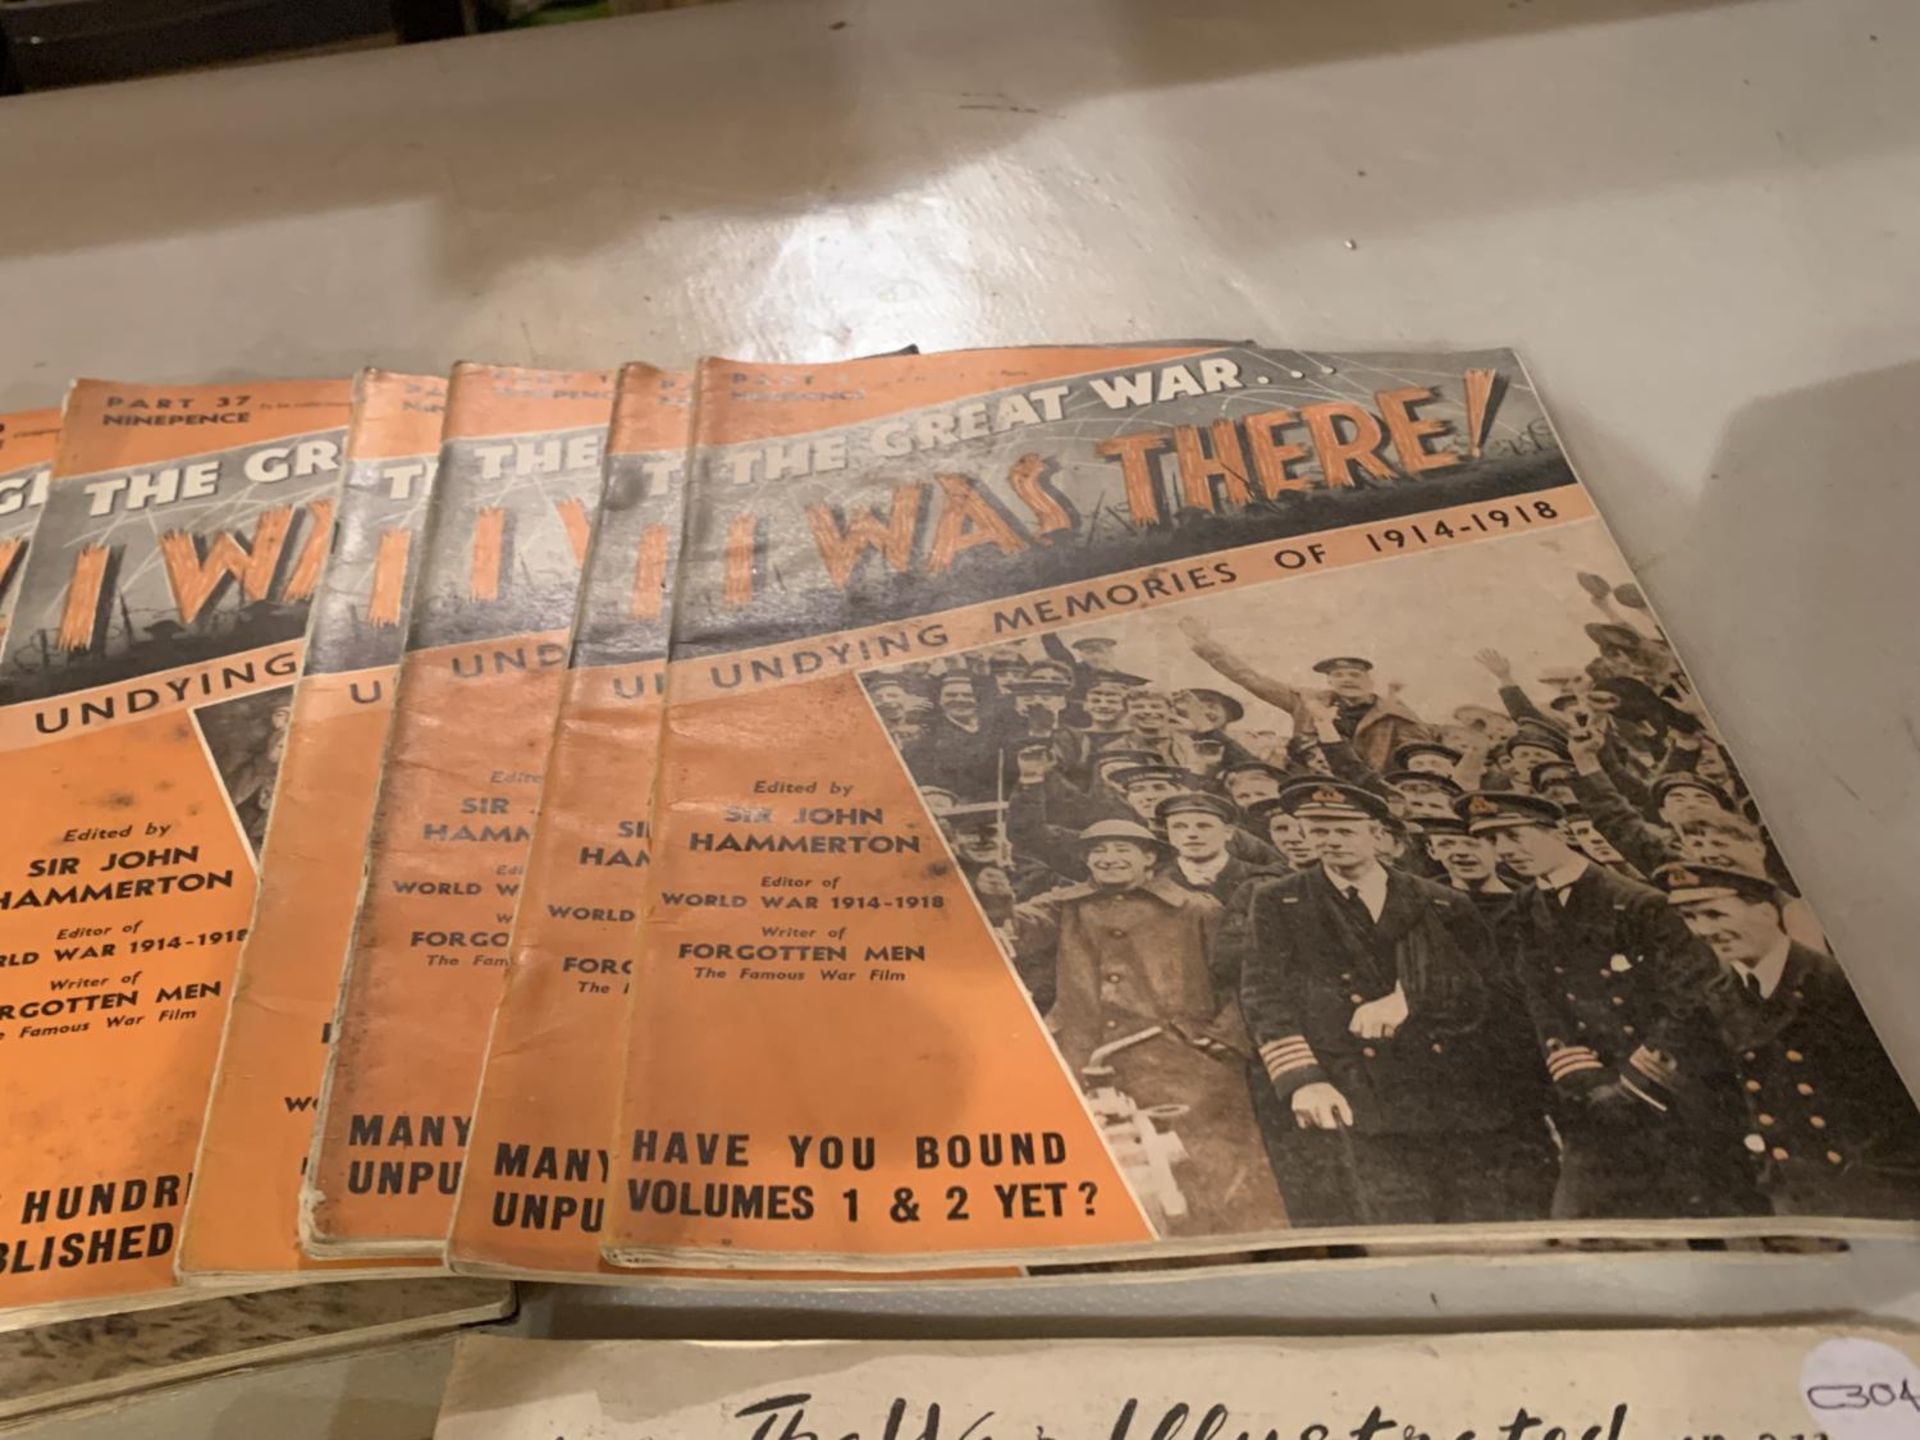 VARIOUS COPIES OF THE WAR ILLUSTRATED AND THE GREAT WAR I WAS THERE PUBLICATIONS - Image 3 of 3